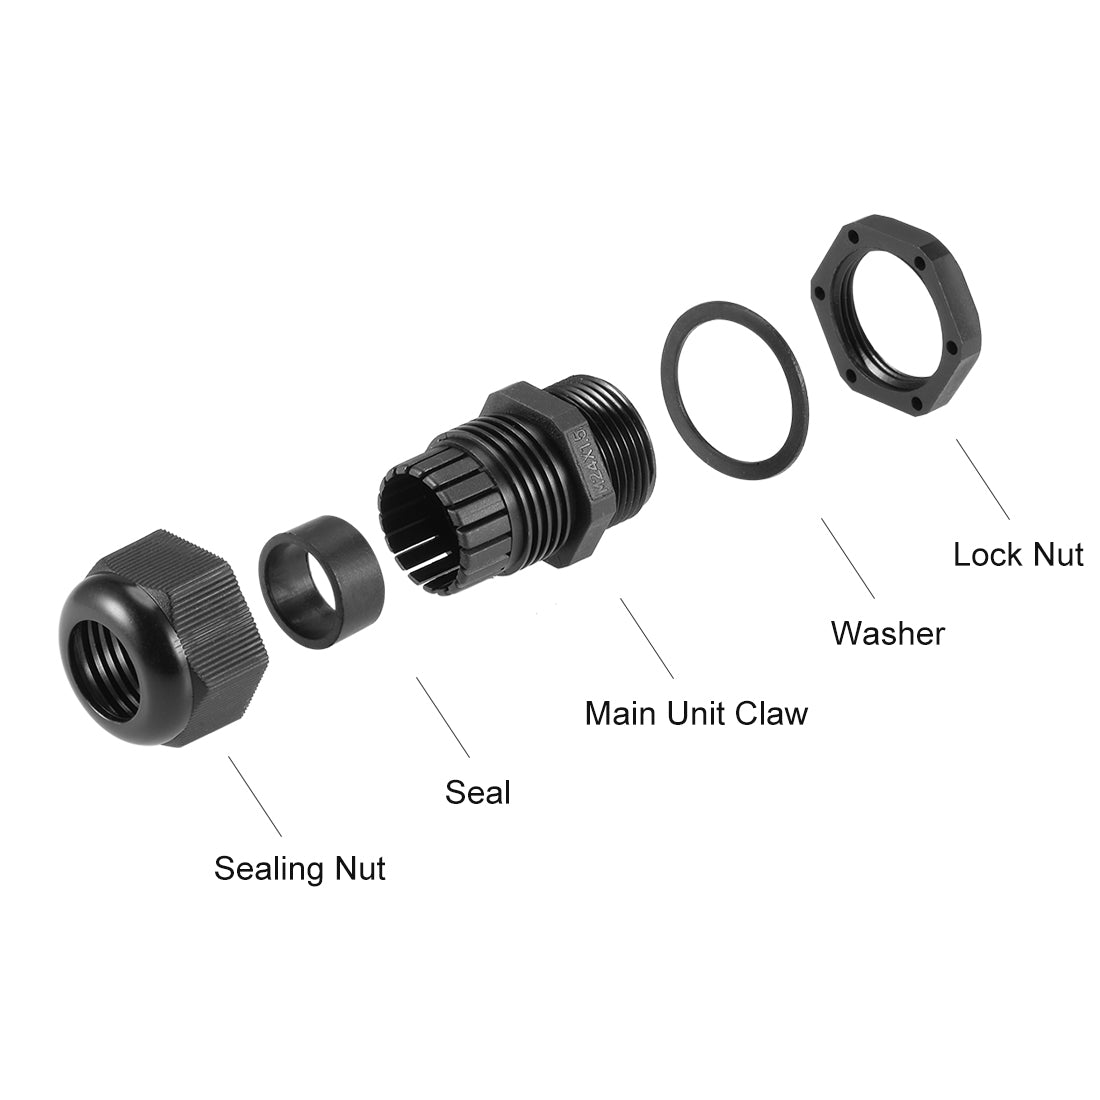 uxcell Uxcell M24x1.5 Cable Gland 12mm-15mm Wire Hole Waterproof Nylon Joint Adjustable Locknut with Washer Black 10pcs